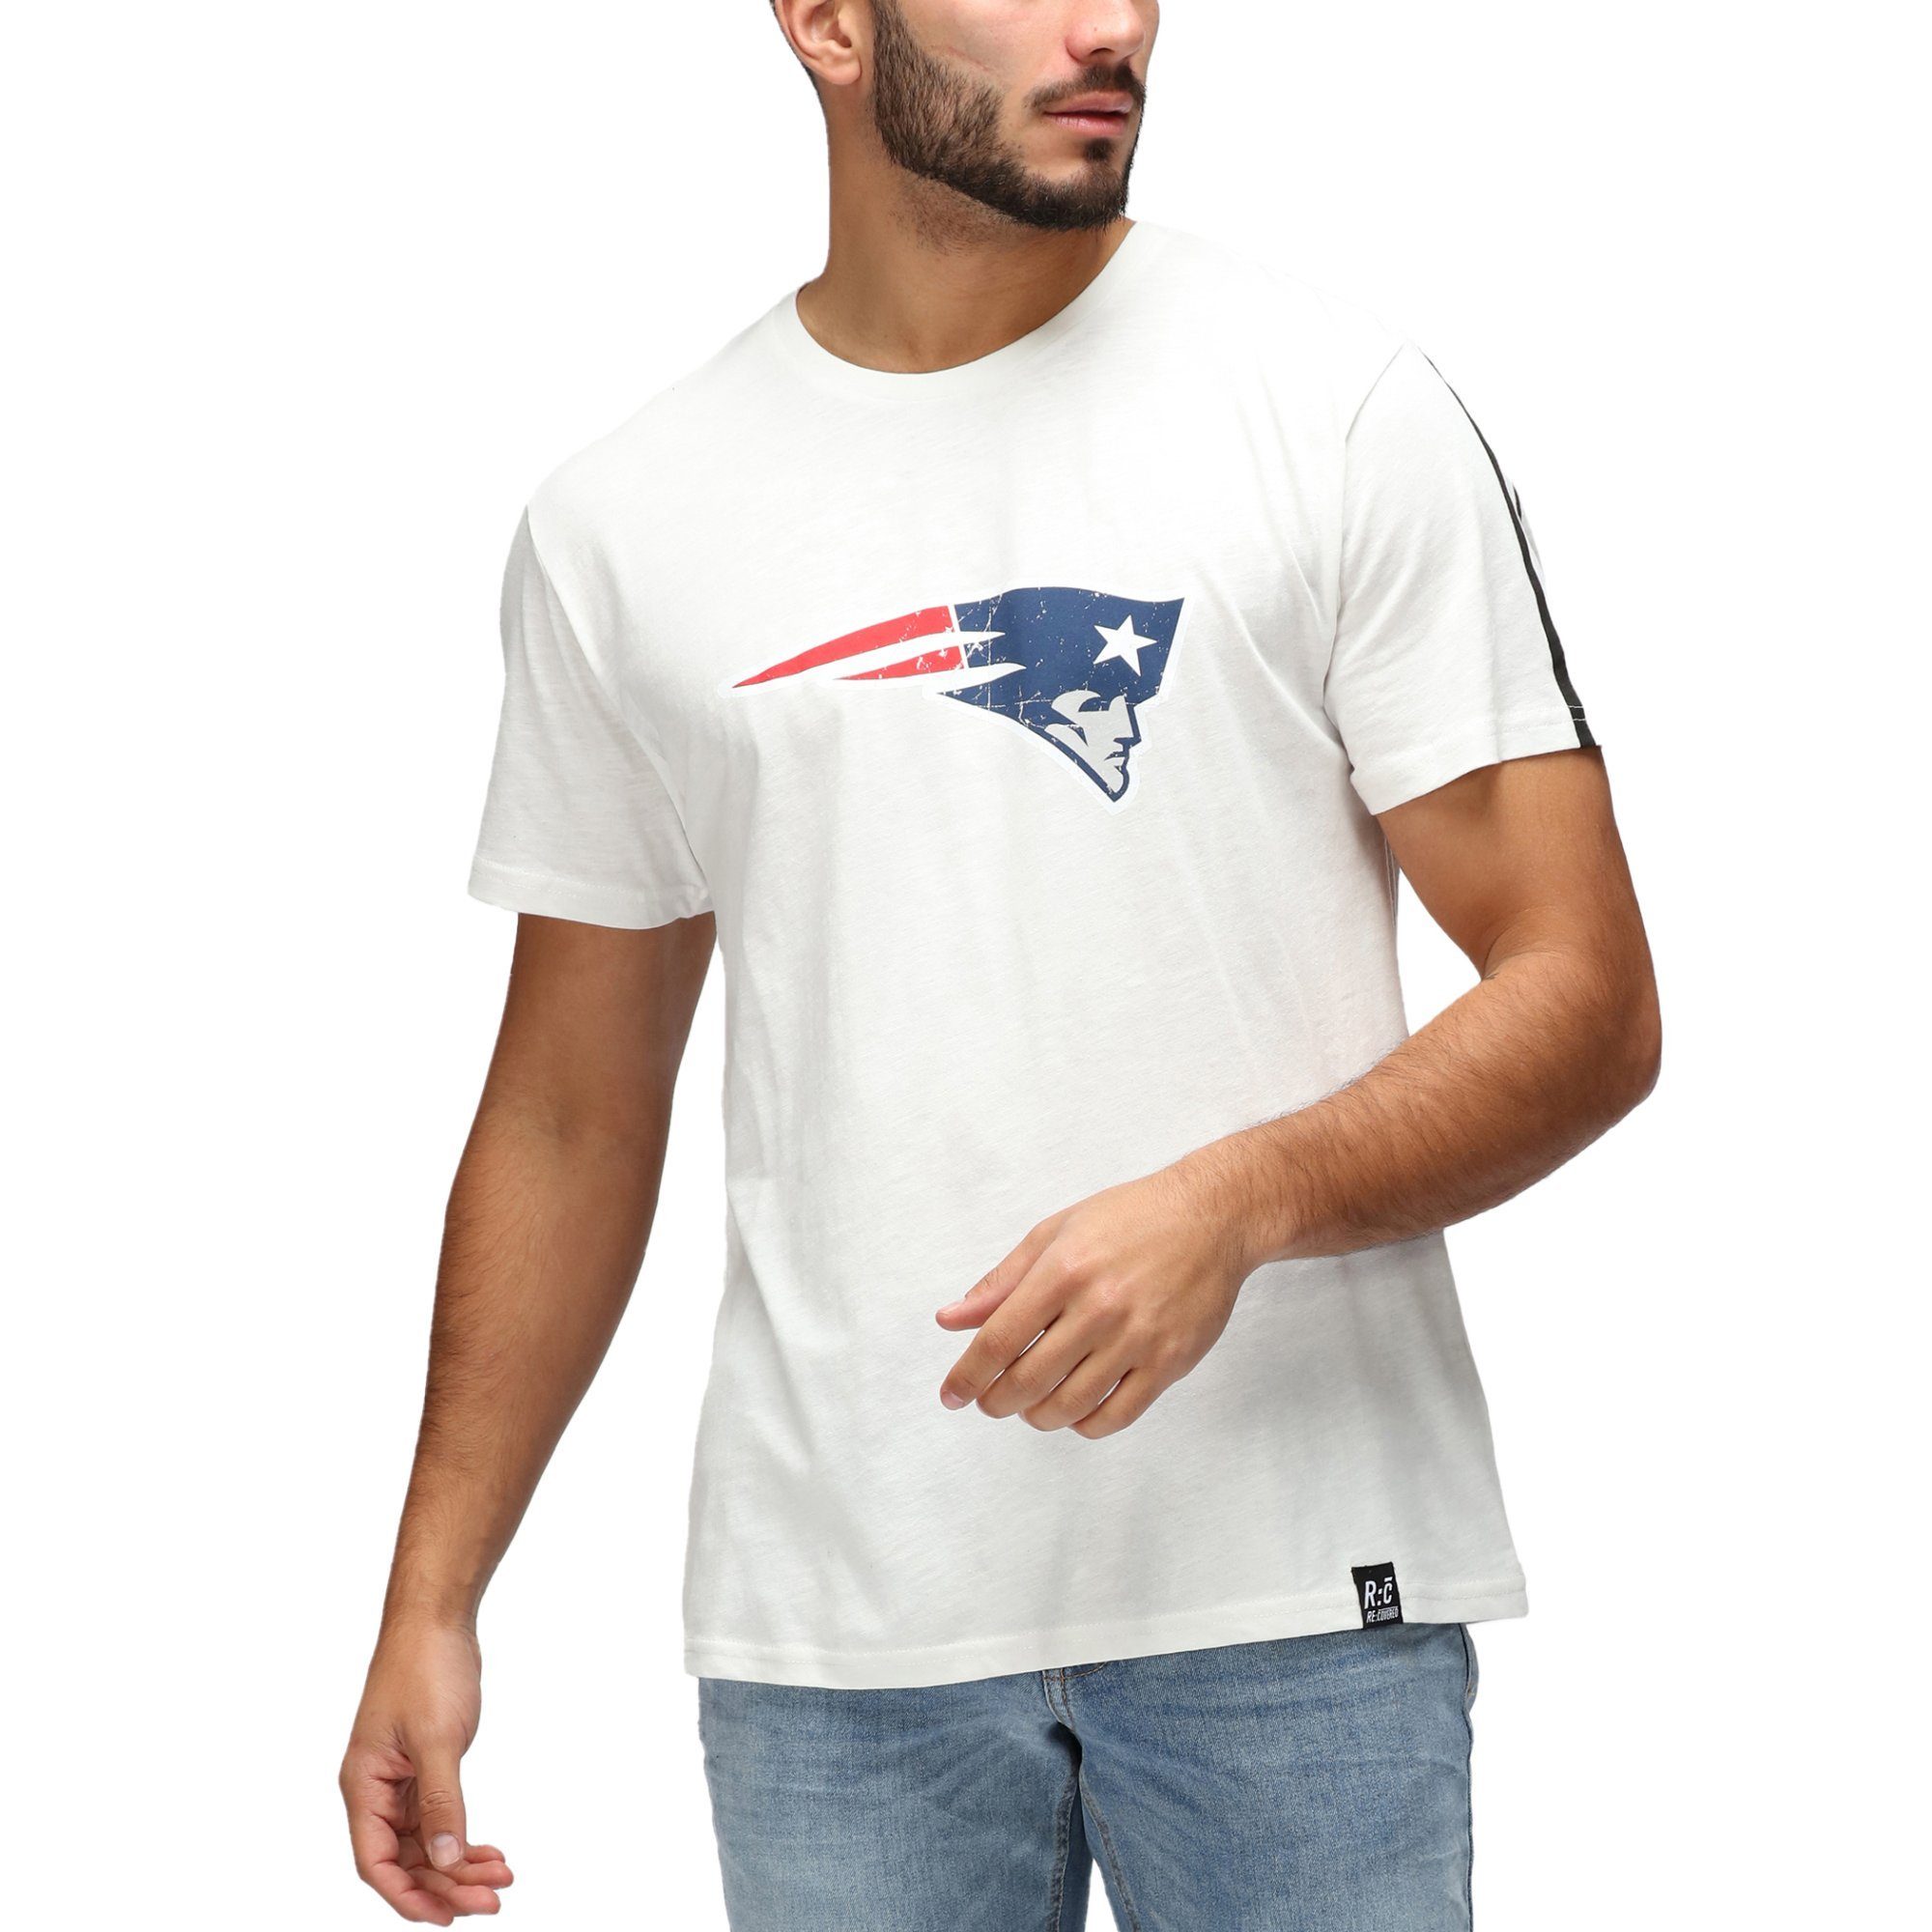 New Recovered ecru Print-Shirt England Re:Covered Patriots NFL